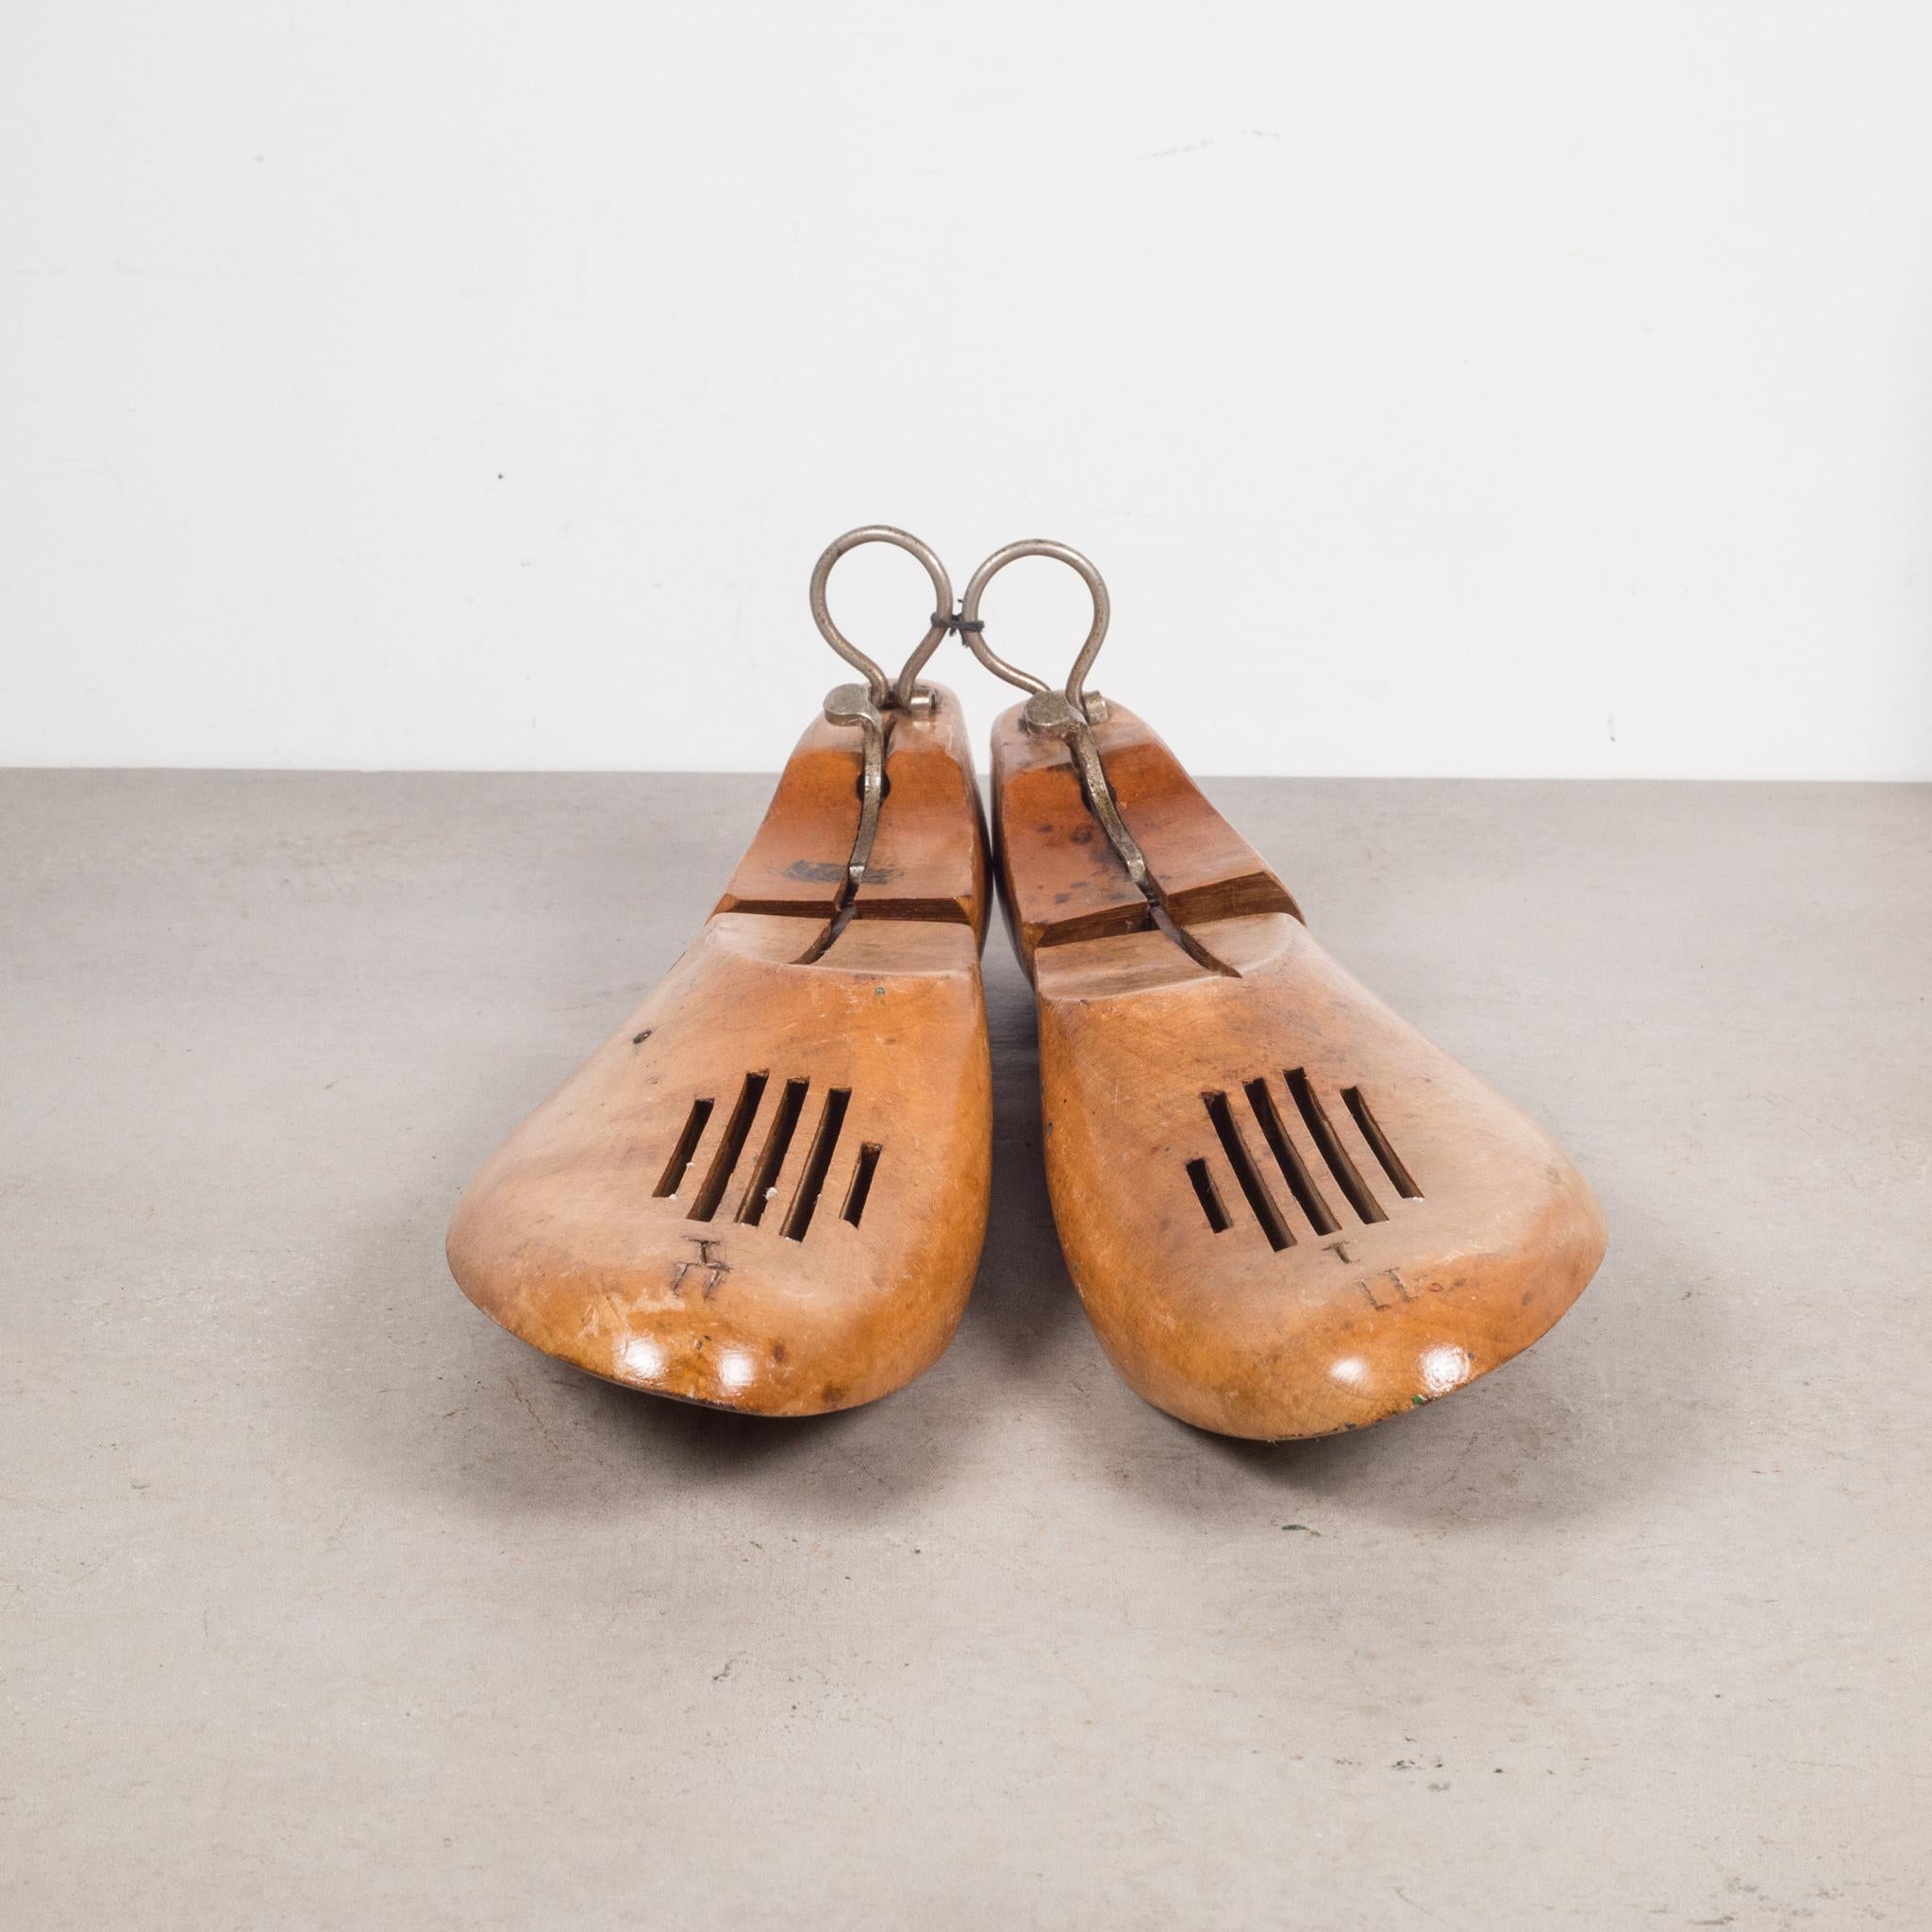 Industrial Antique Wooden Shoe Forms with Handles, c.1920 For Sale